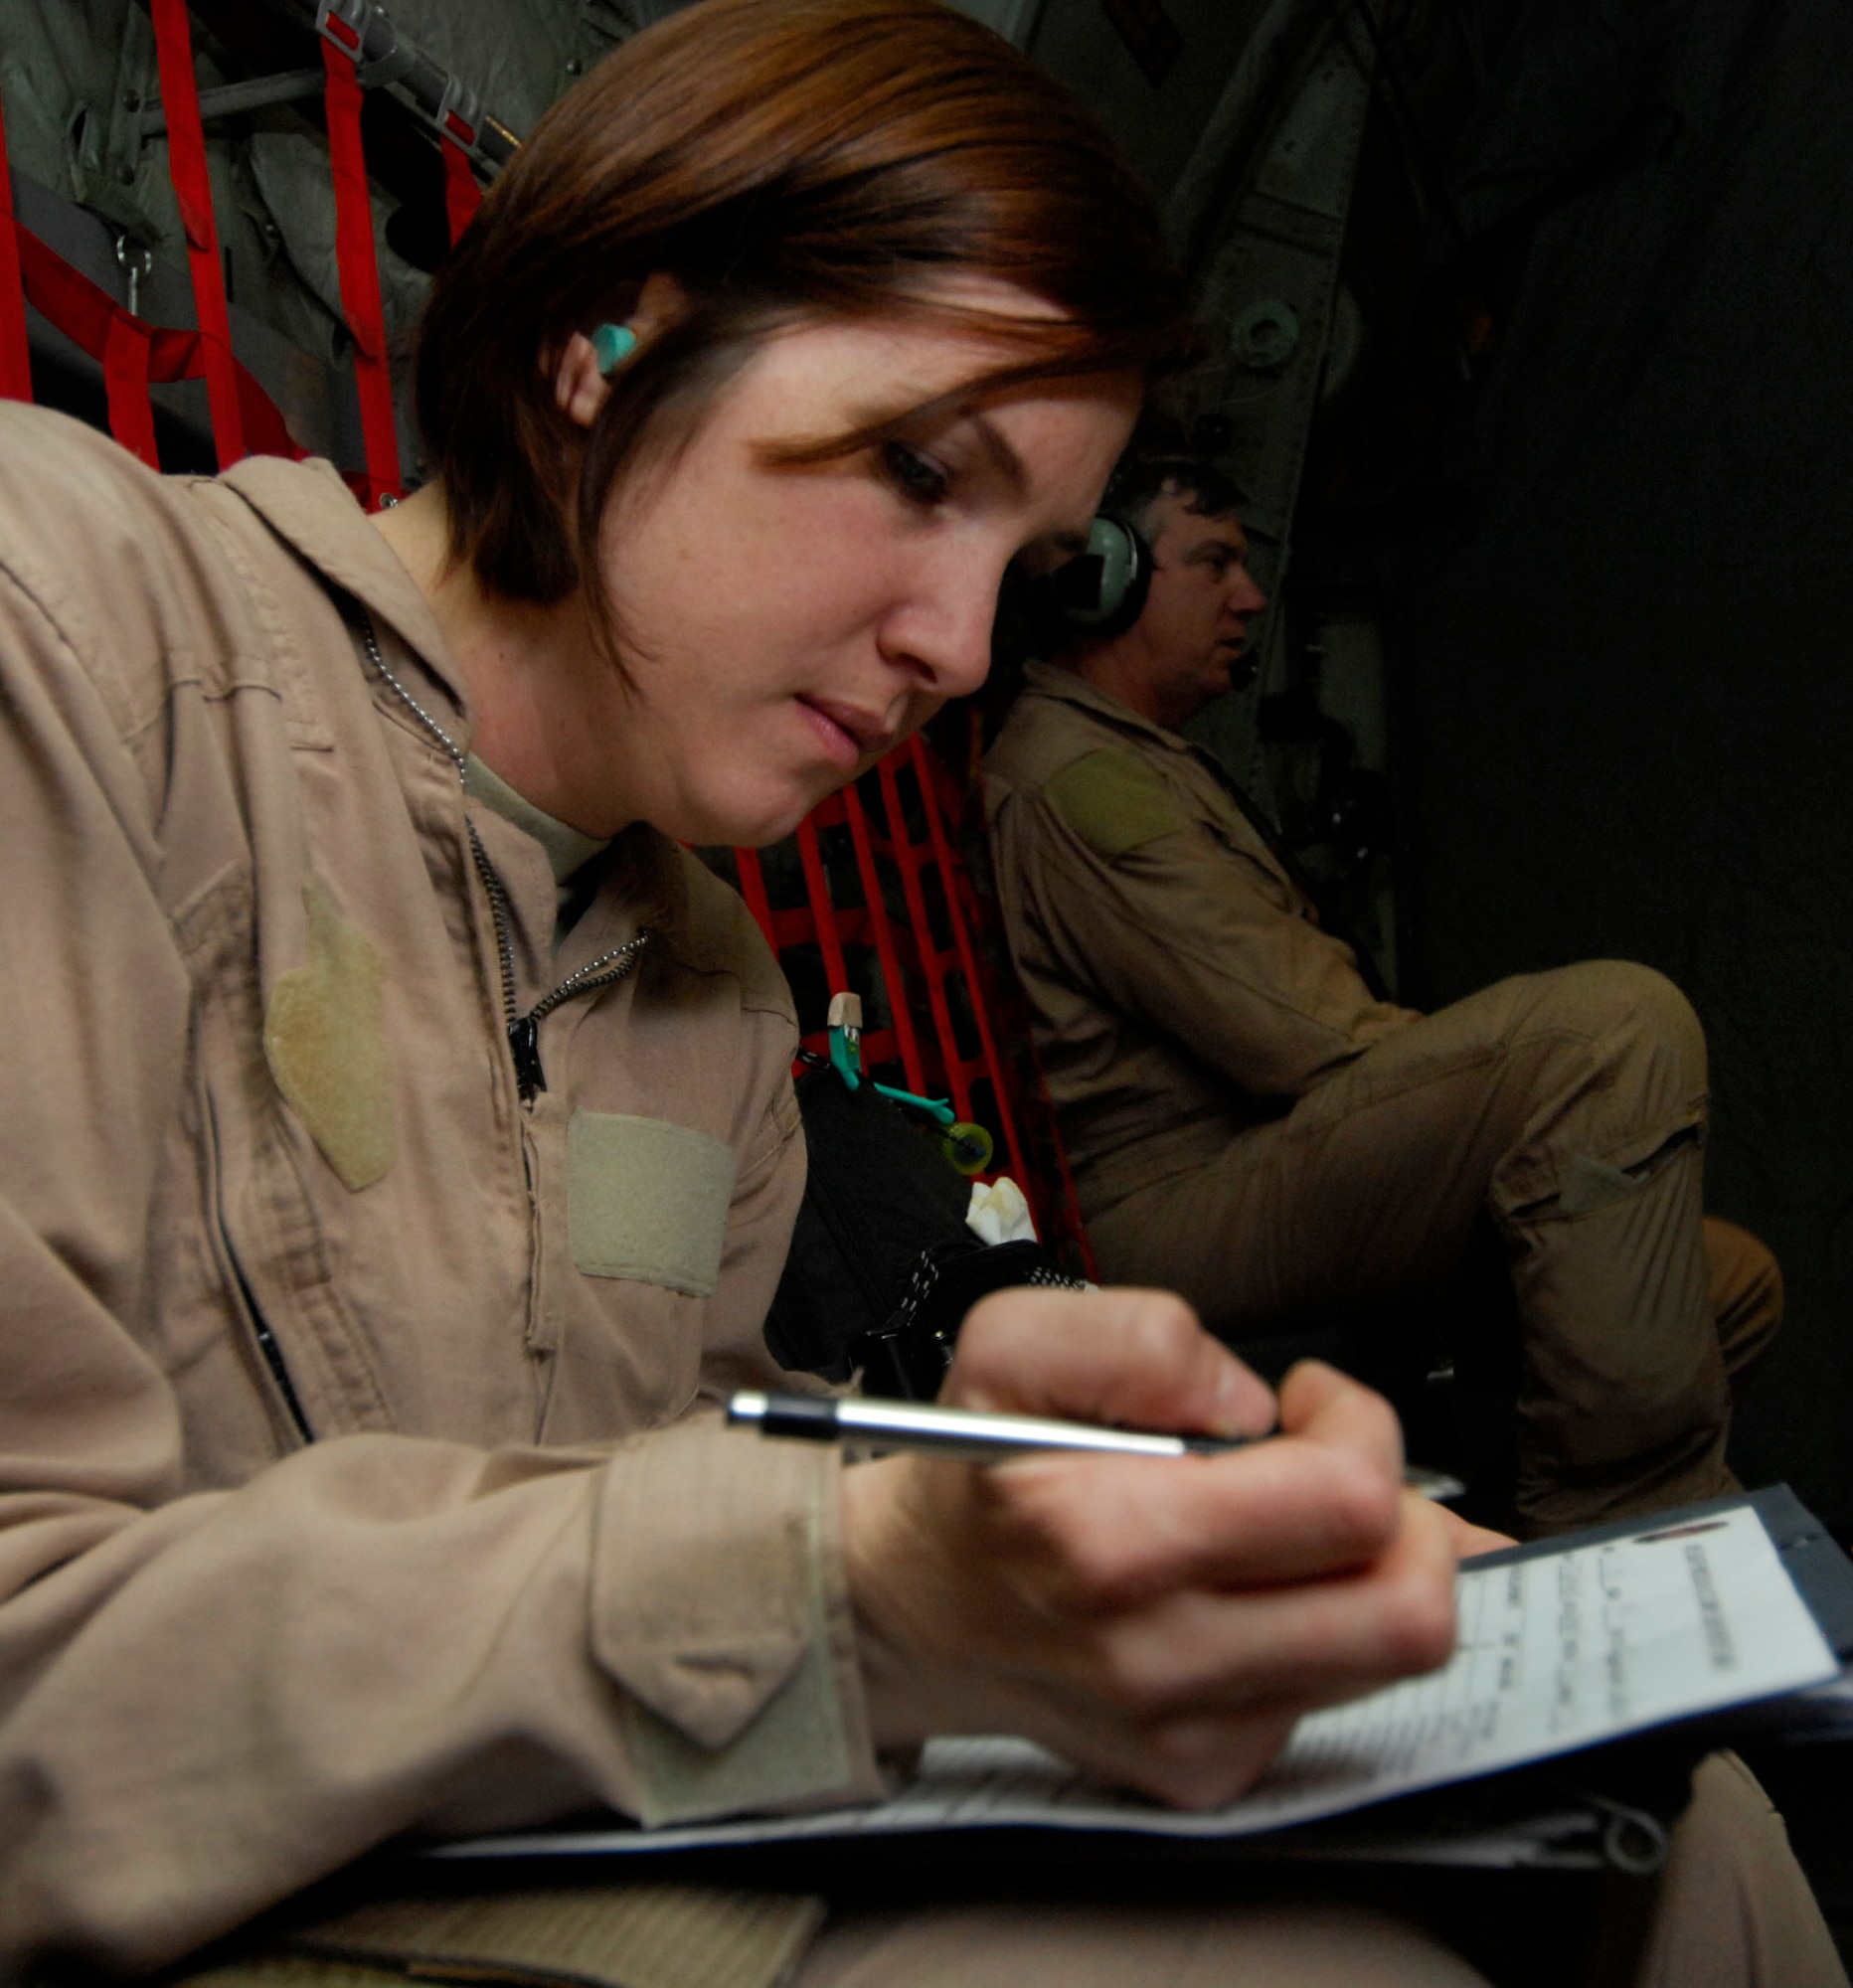 Capt. Susan McCormick keeps track of a patient's paperwork March 26 during an aeromedical evacuation flight to Bagram Airfield, Afghanistan. Captain McCormick, a flight nurse with the 455th Expeditionary Aeromedical Evacuation Flight at Bagram, is required to keep a log for each patient while enroute to their destination.  She is deployed from Westover Air Reserve Base, Mass. (U.S. Air Force photo/Senior Airman Erik Cardenas)